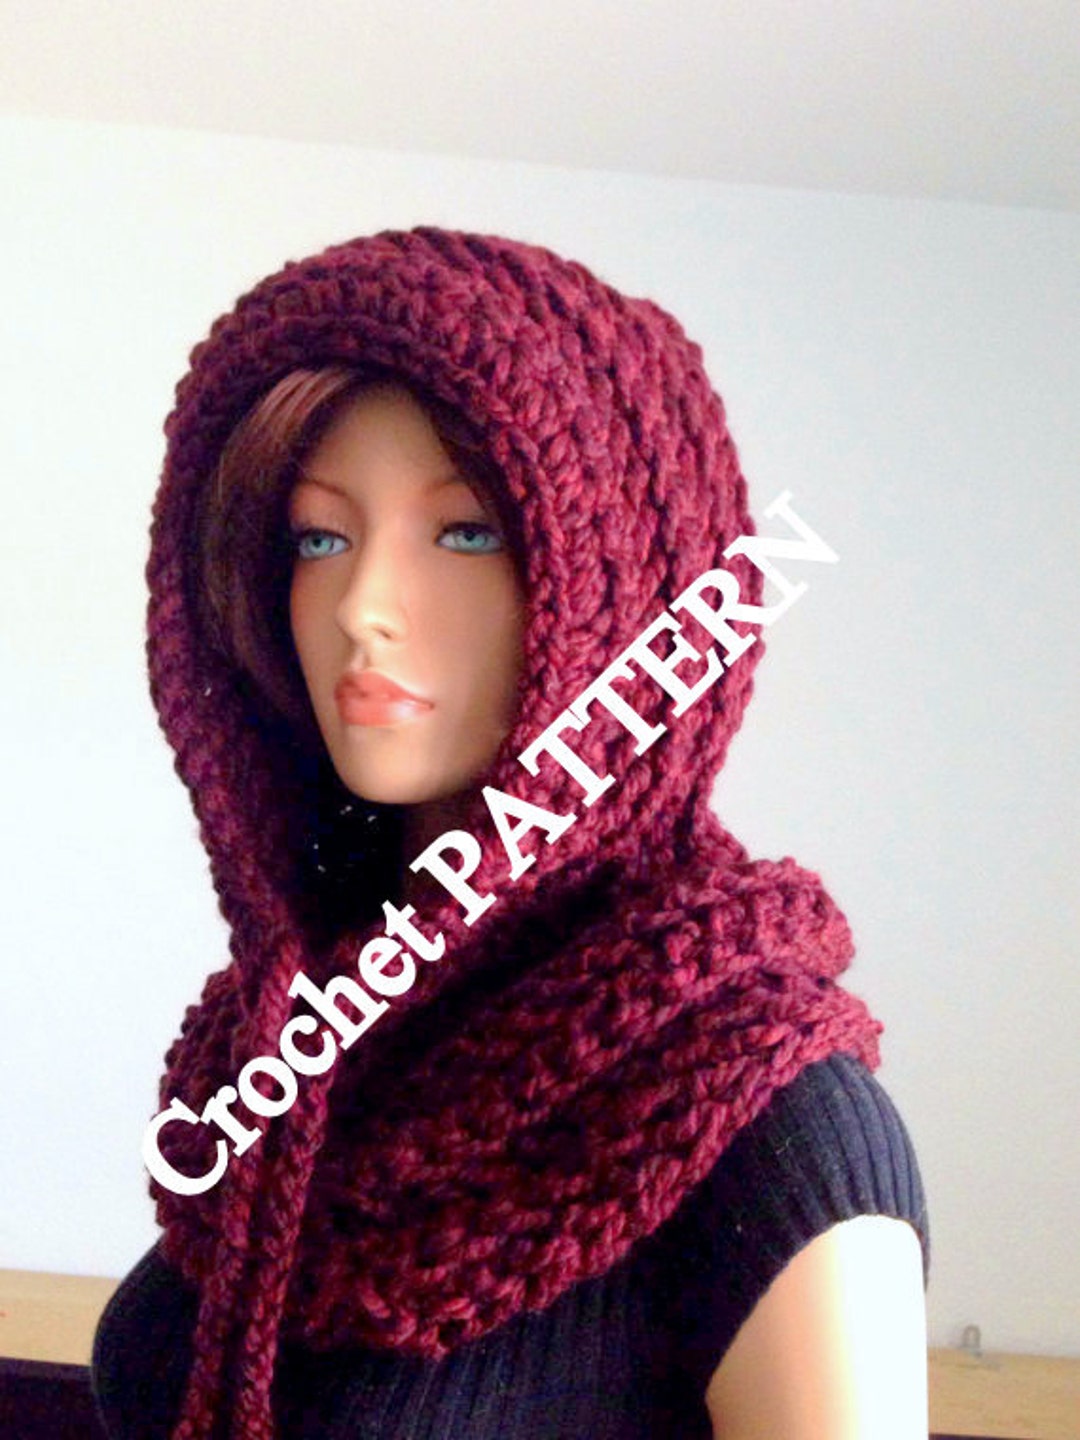 Instant Download PATTERN ONLY. Crochet Hooded Cowl - Etsy